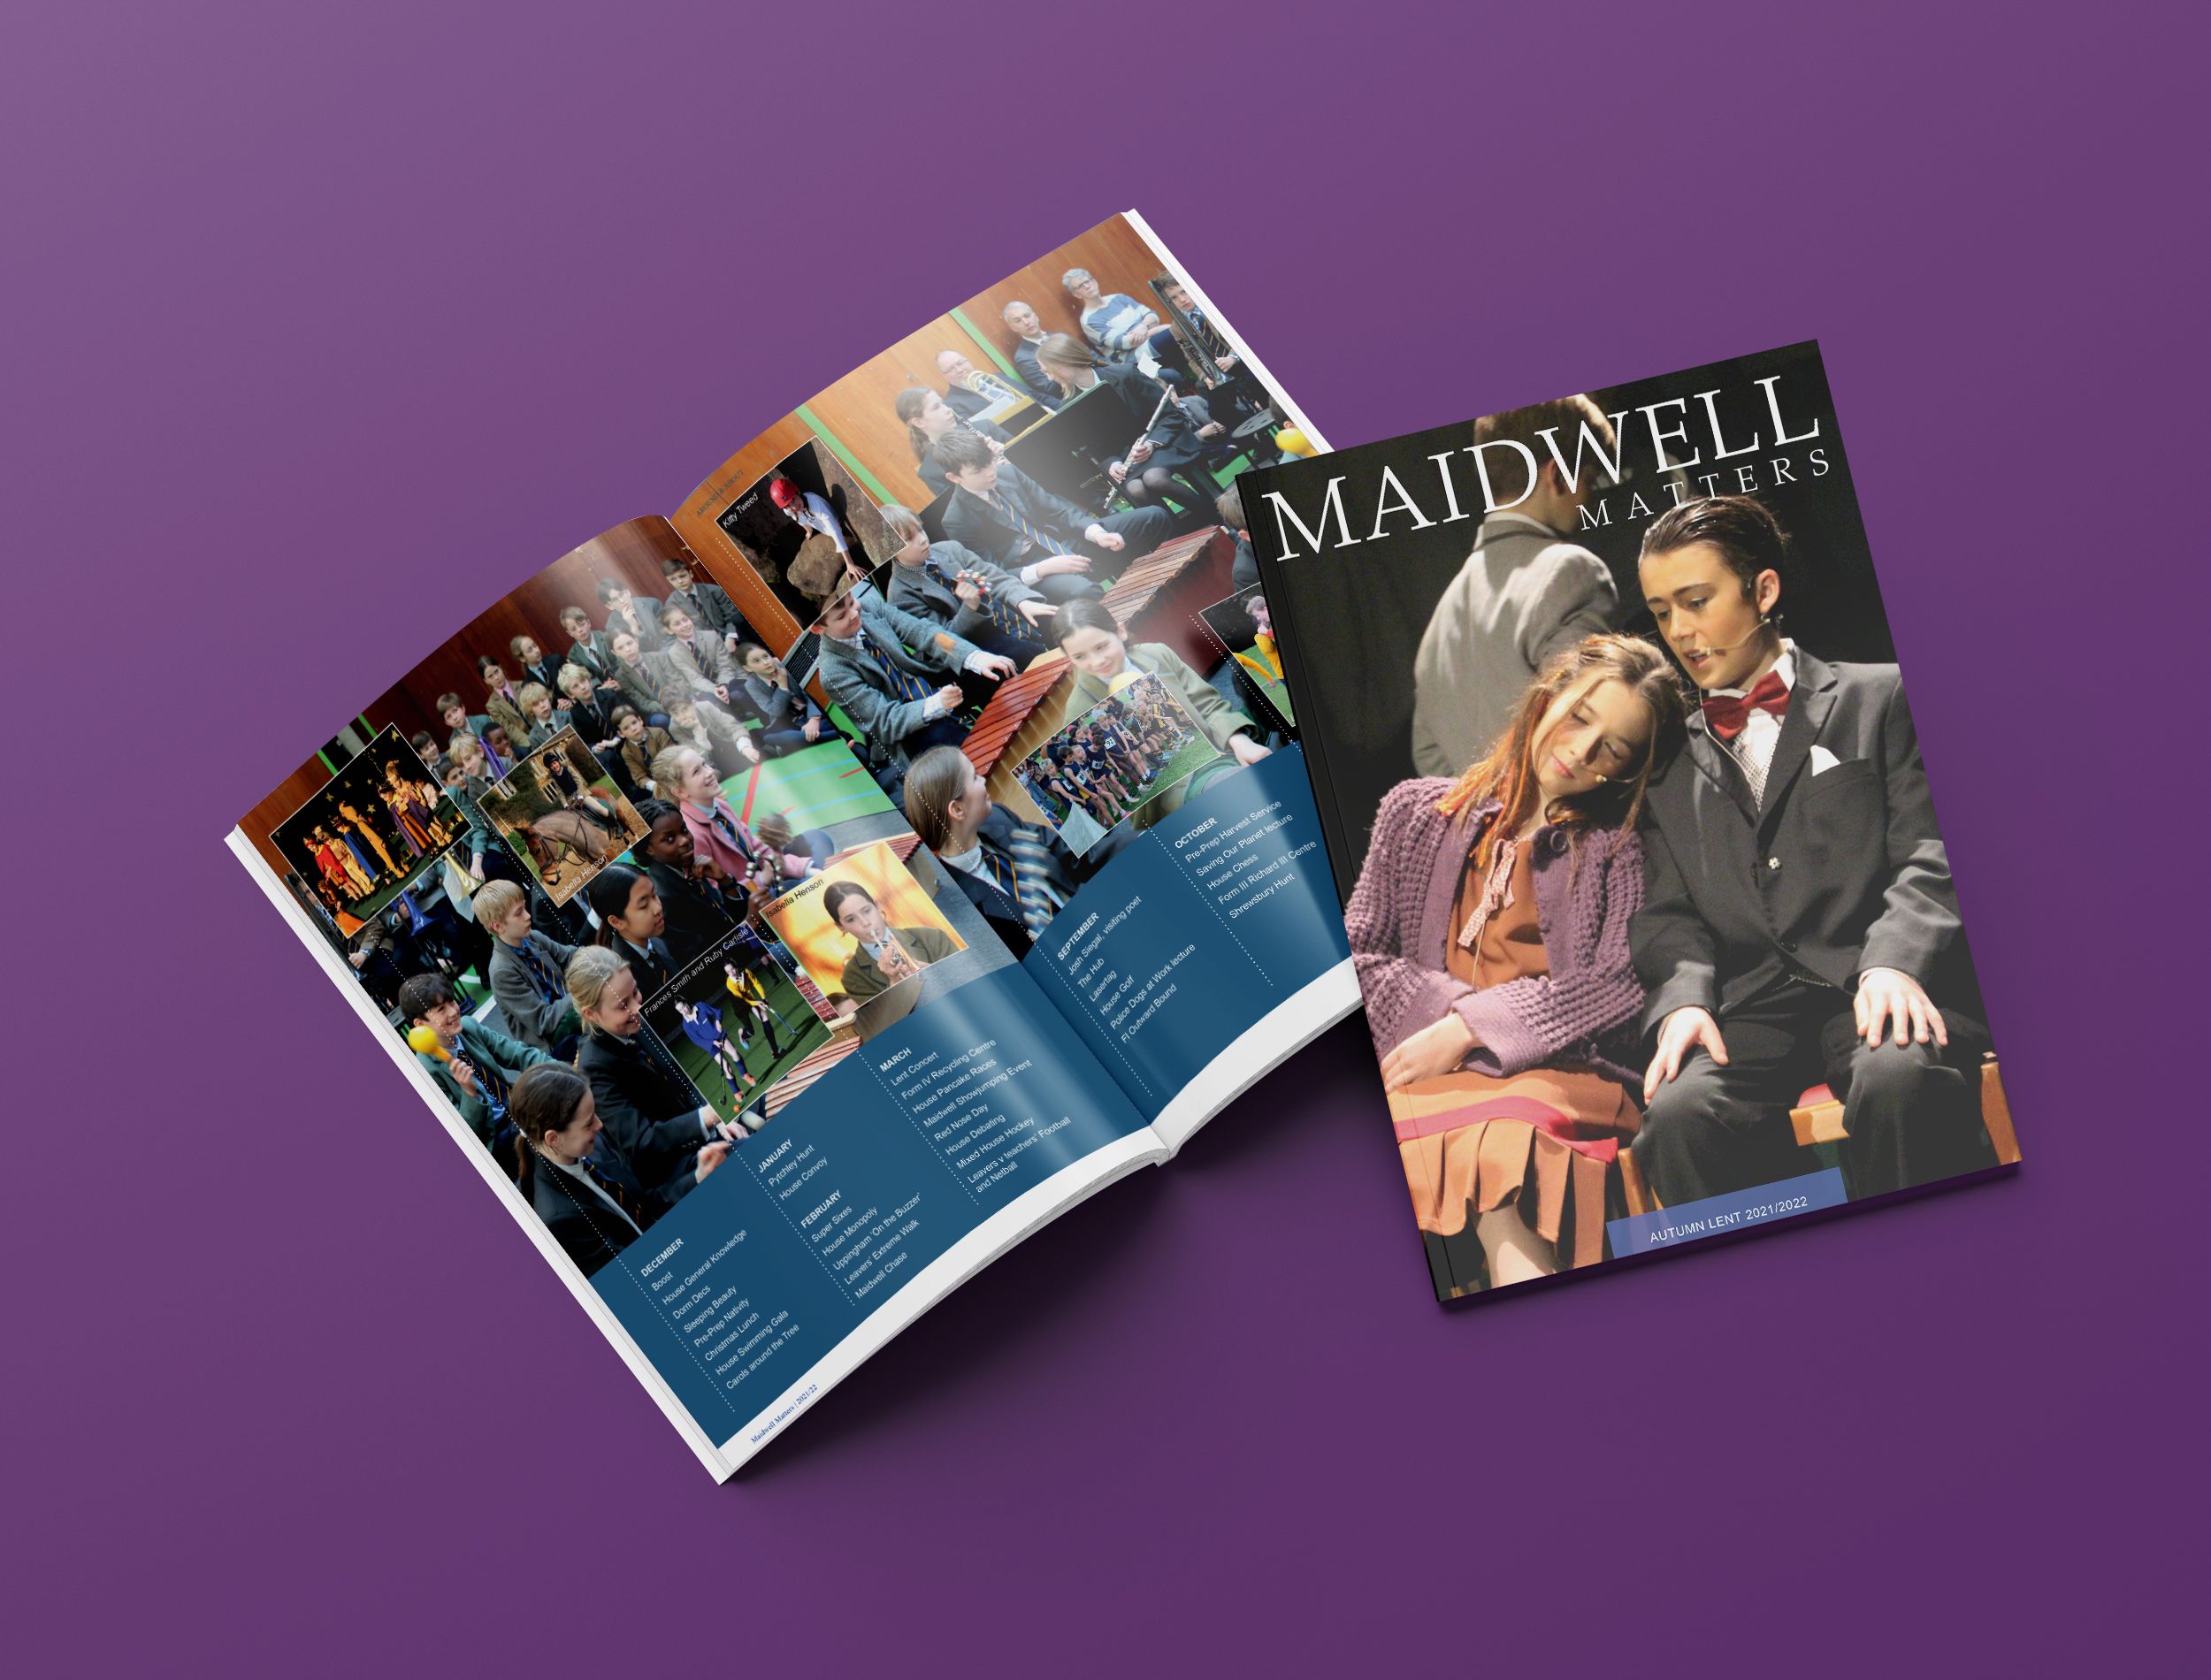 Maidwell Matters - Lent Annual 2022